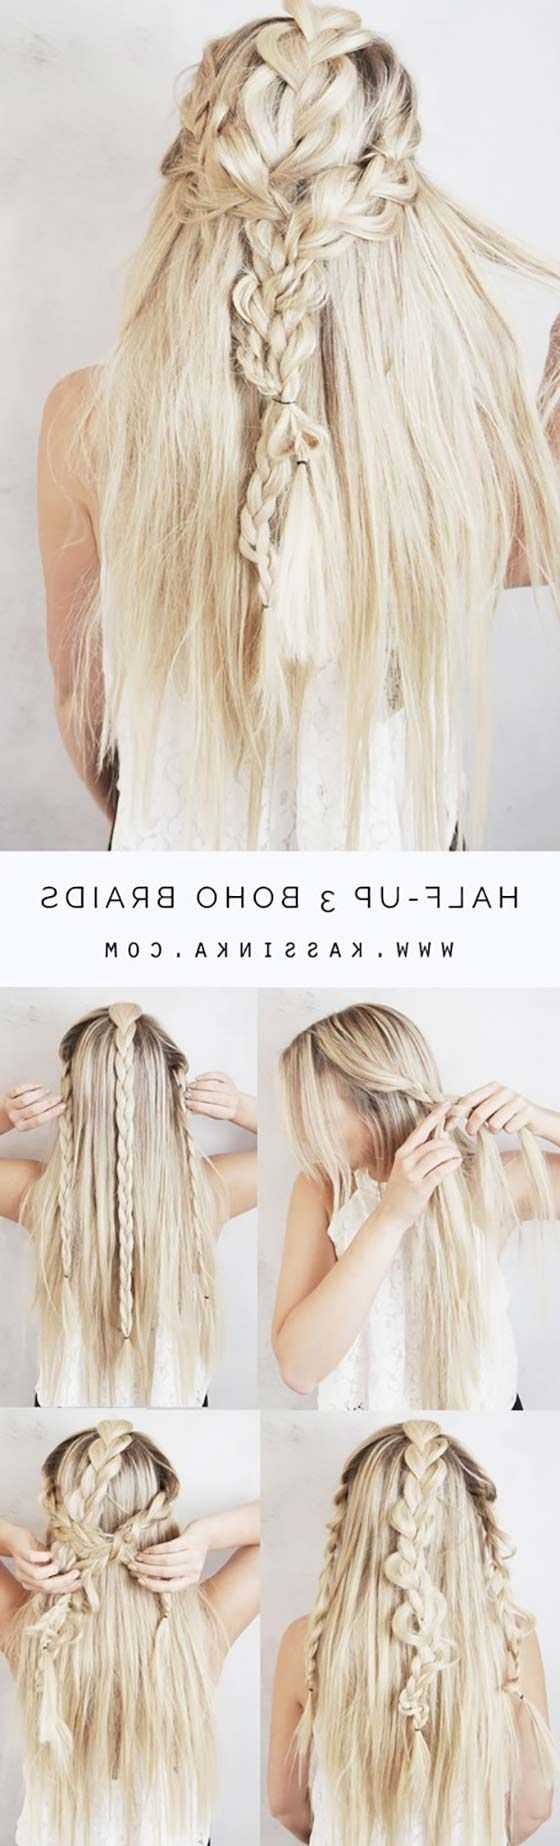 40 Braided Hairstyles For Long Hair With Regard To Fashionable Long Braided Hairstyles (Gallery 4 of 15)